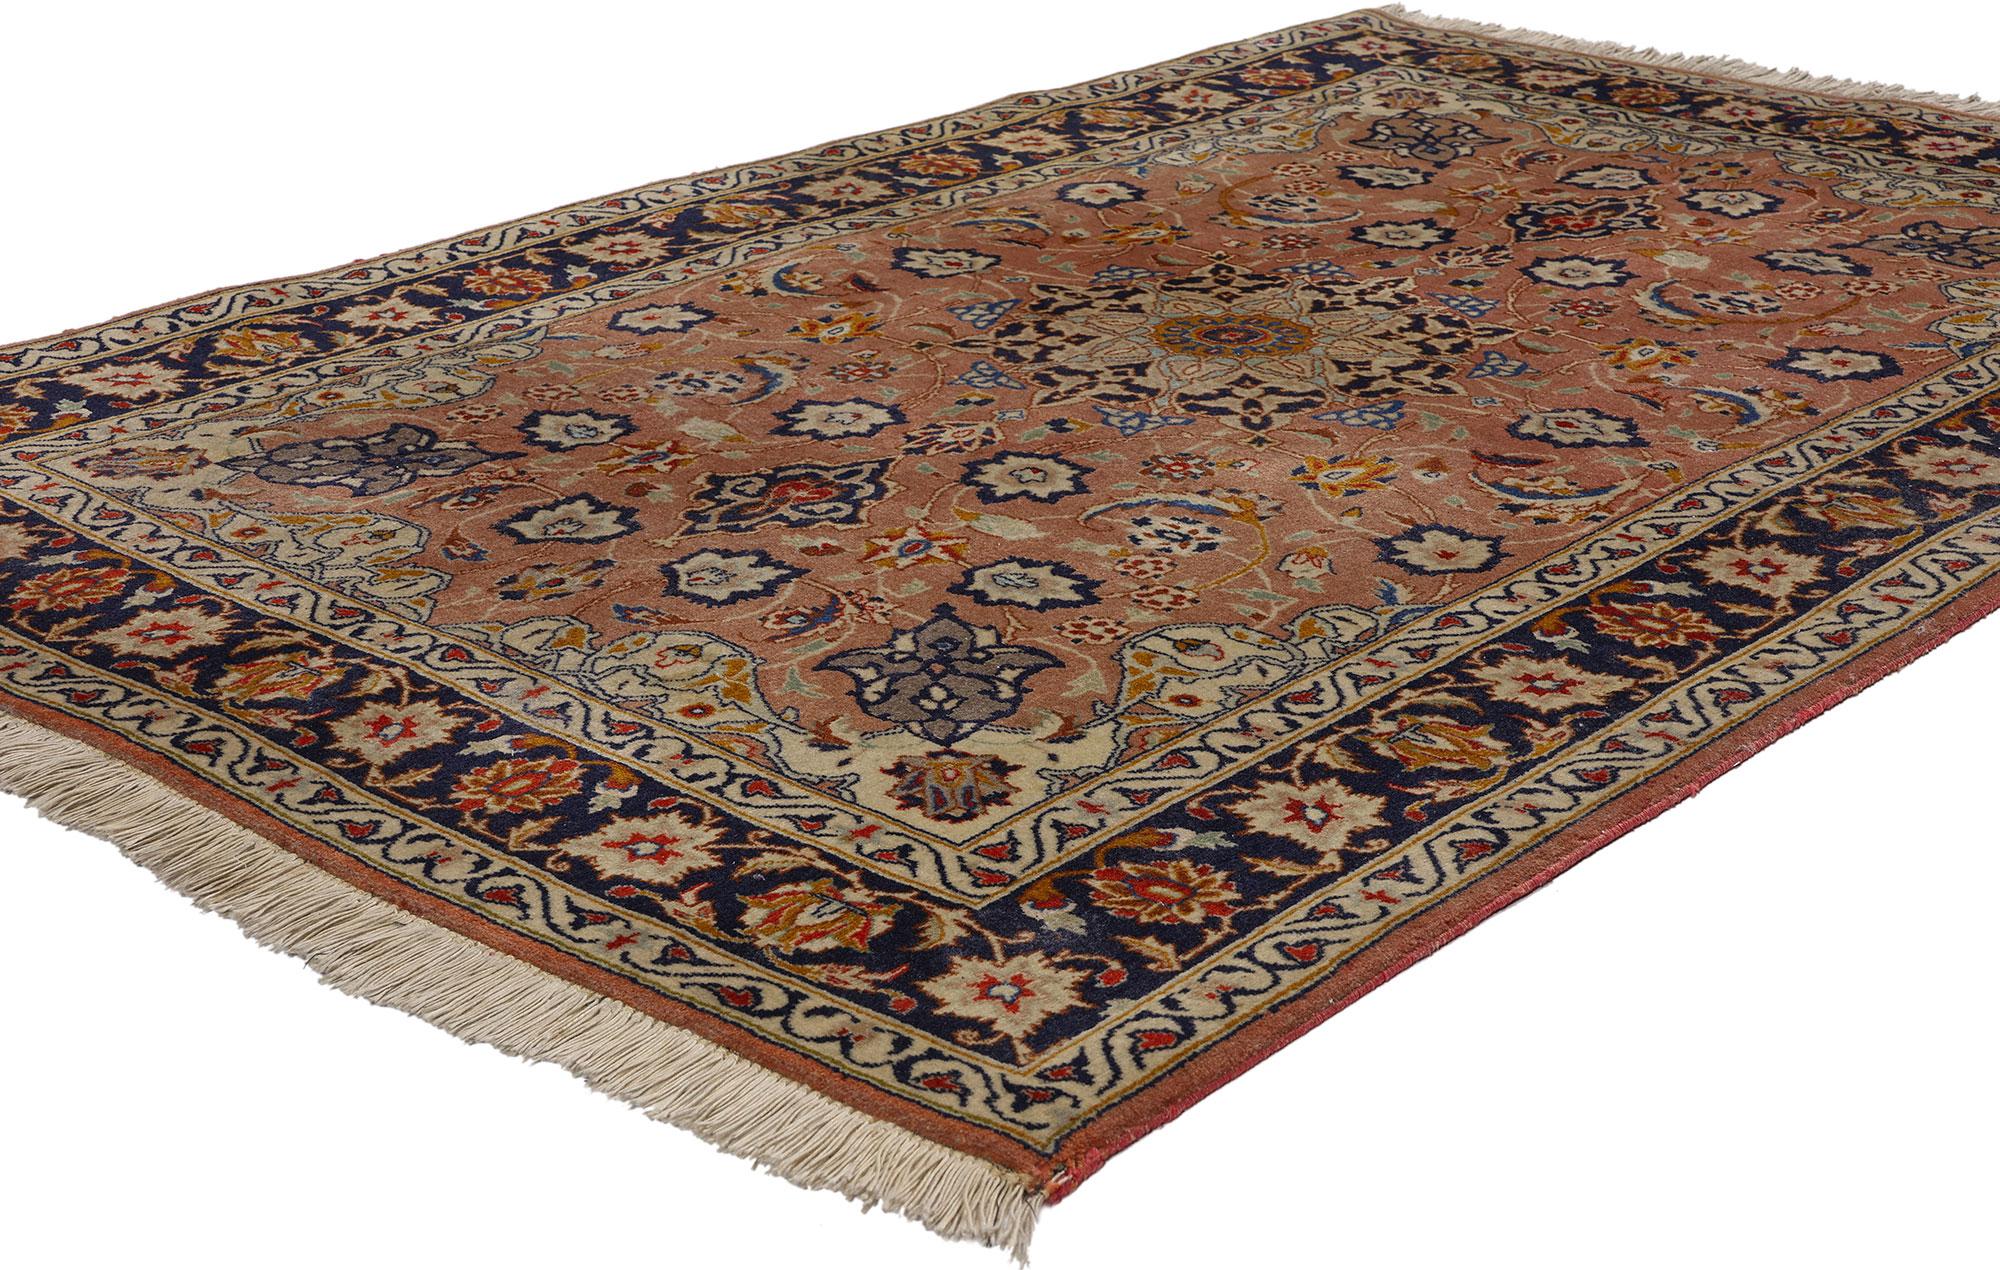 78703 Small Vintage Persian Tabriz Rug, 03'05 x 05'01. Please note this listing is for one piece. There is a matching piece available adds to its rarity. Originating from the historic city of Tabriz in northwestern Iran, Persian Tabriz rugs